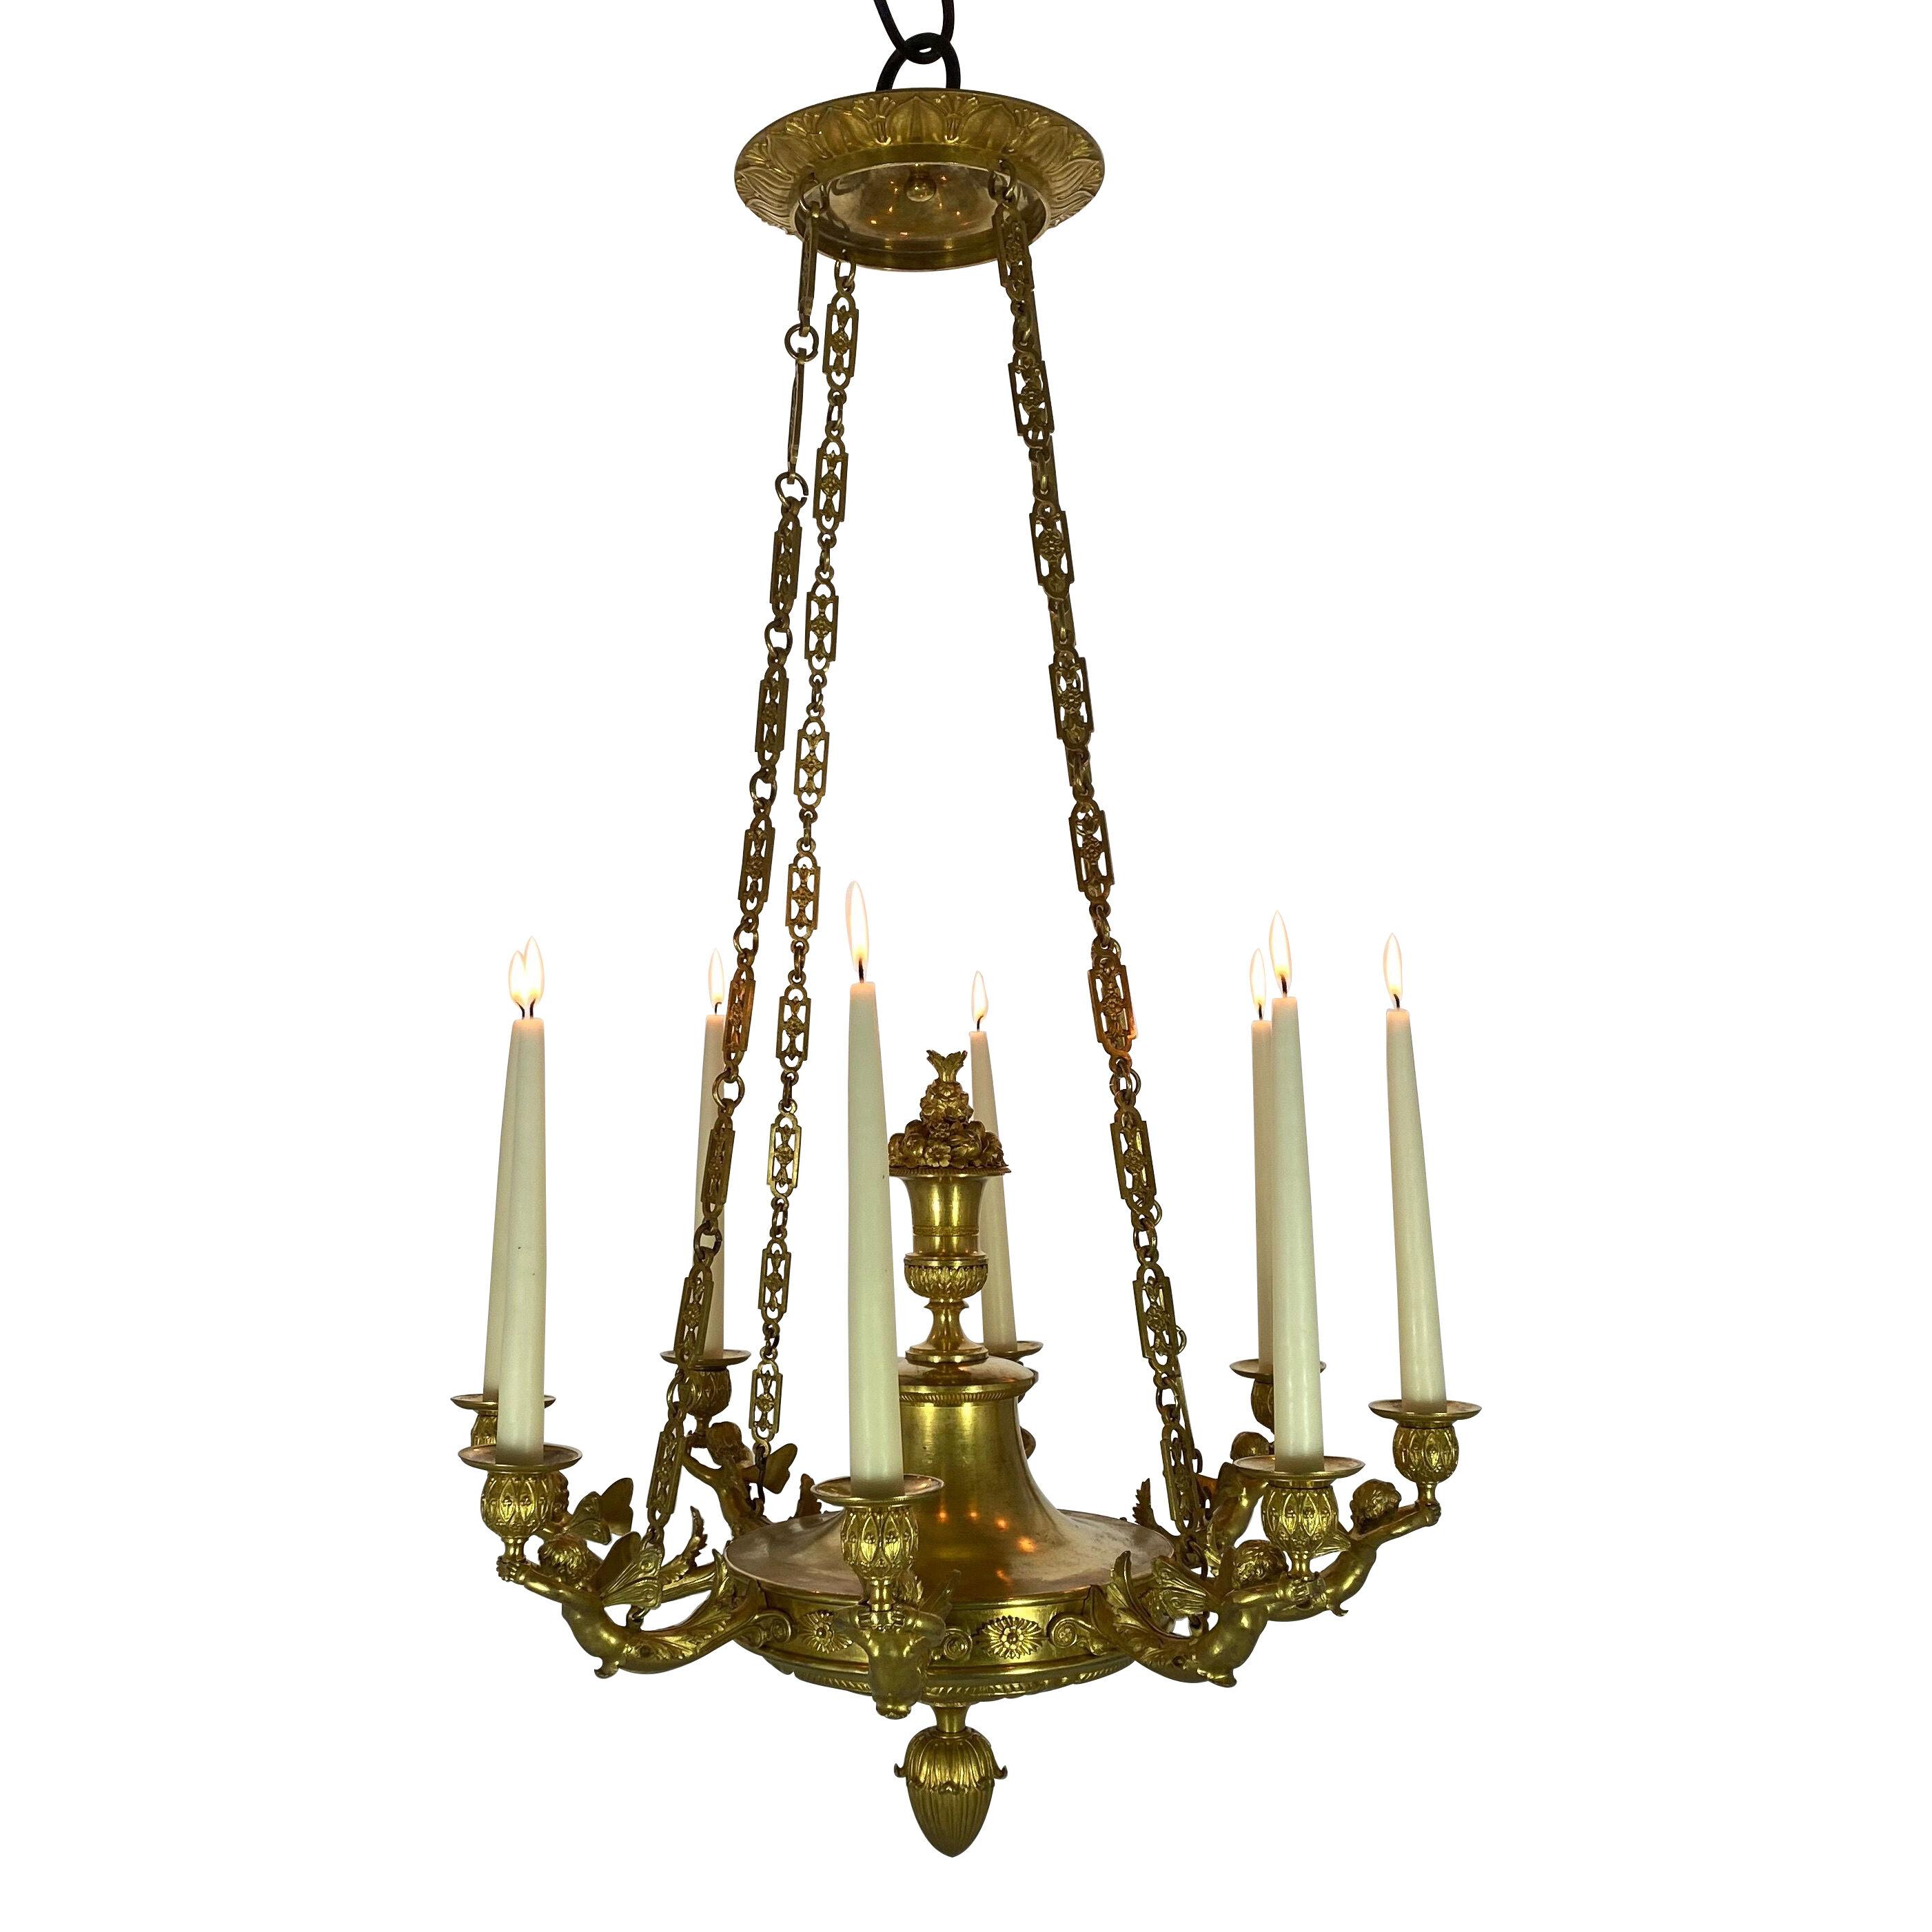 Empire-chandelier made 1820